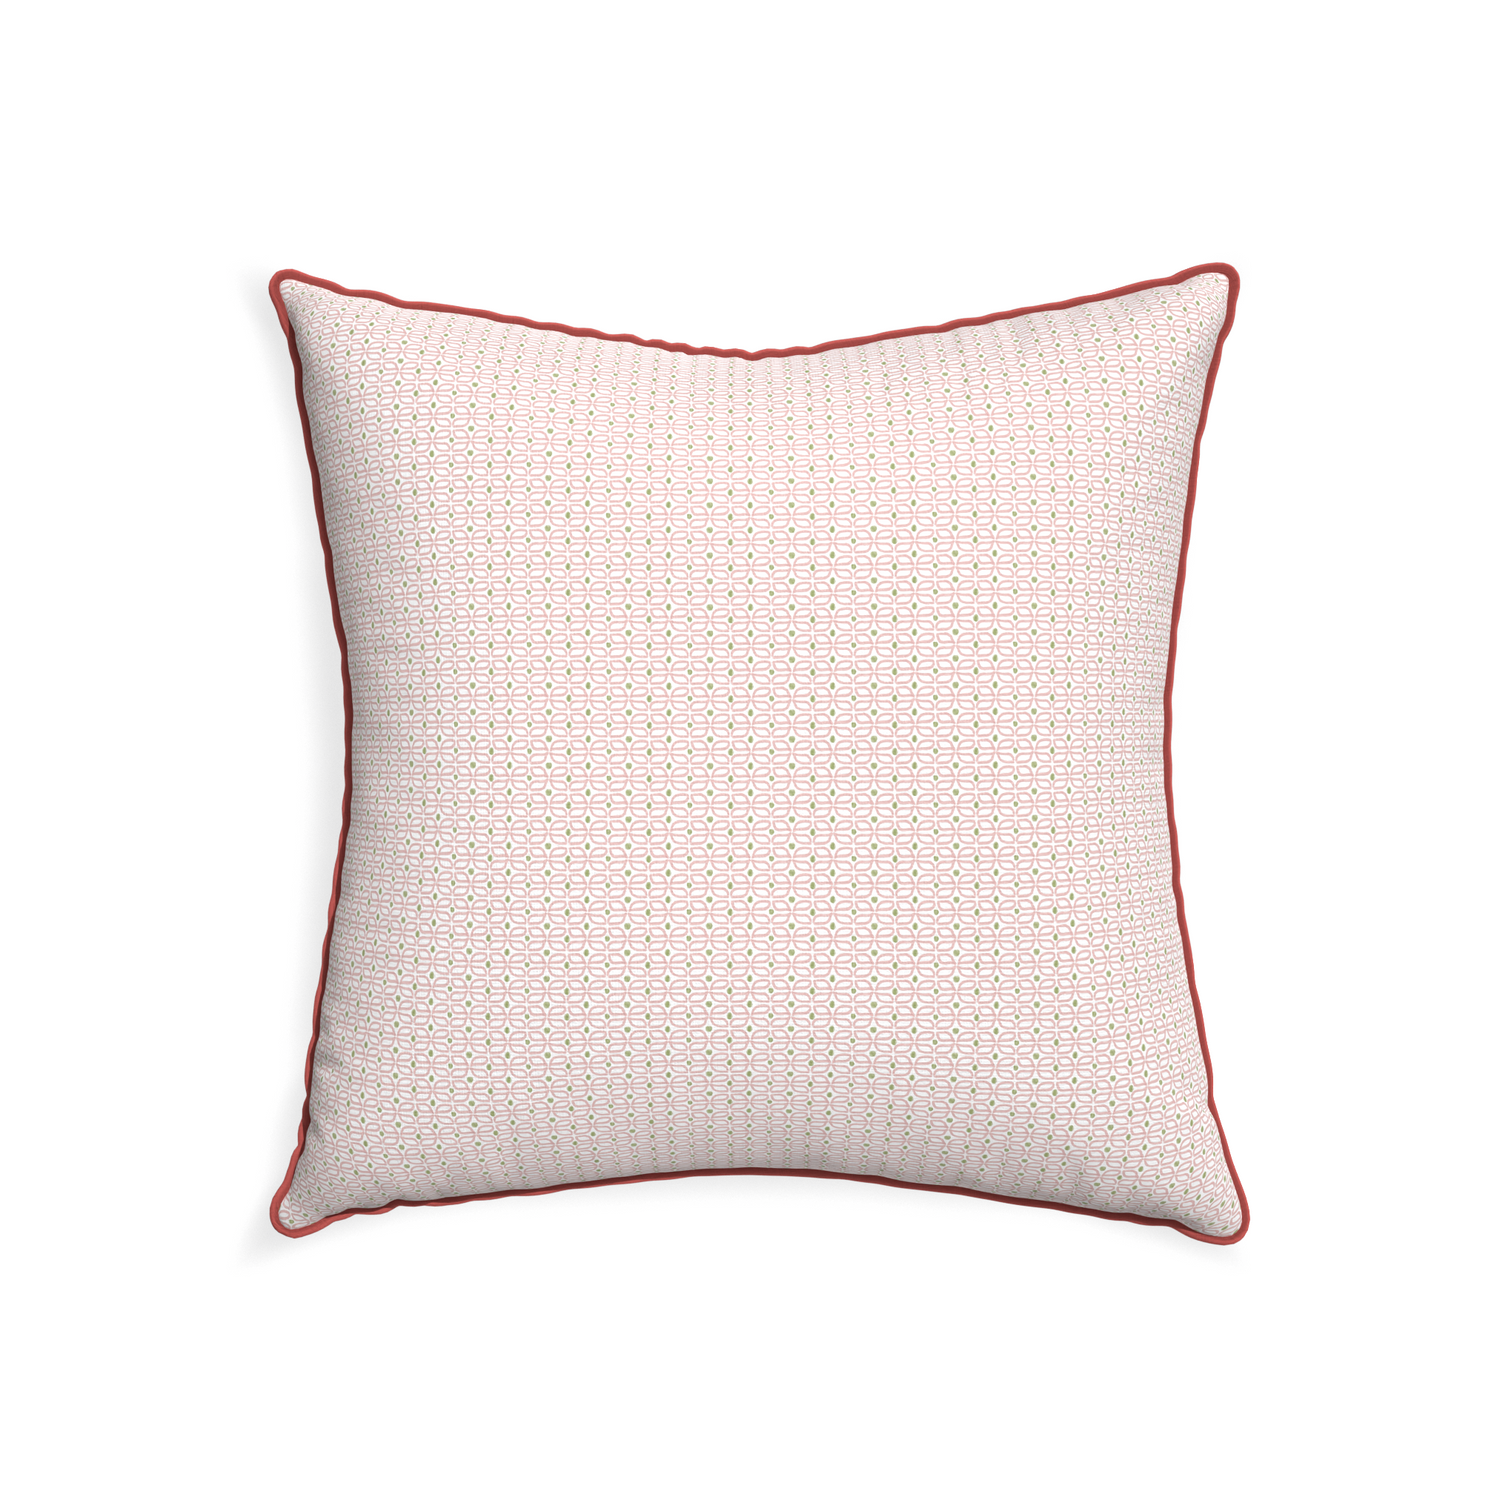 22-square loomi pink custom pillow with c piping on white background